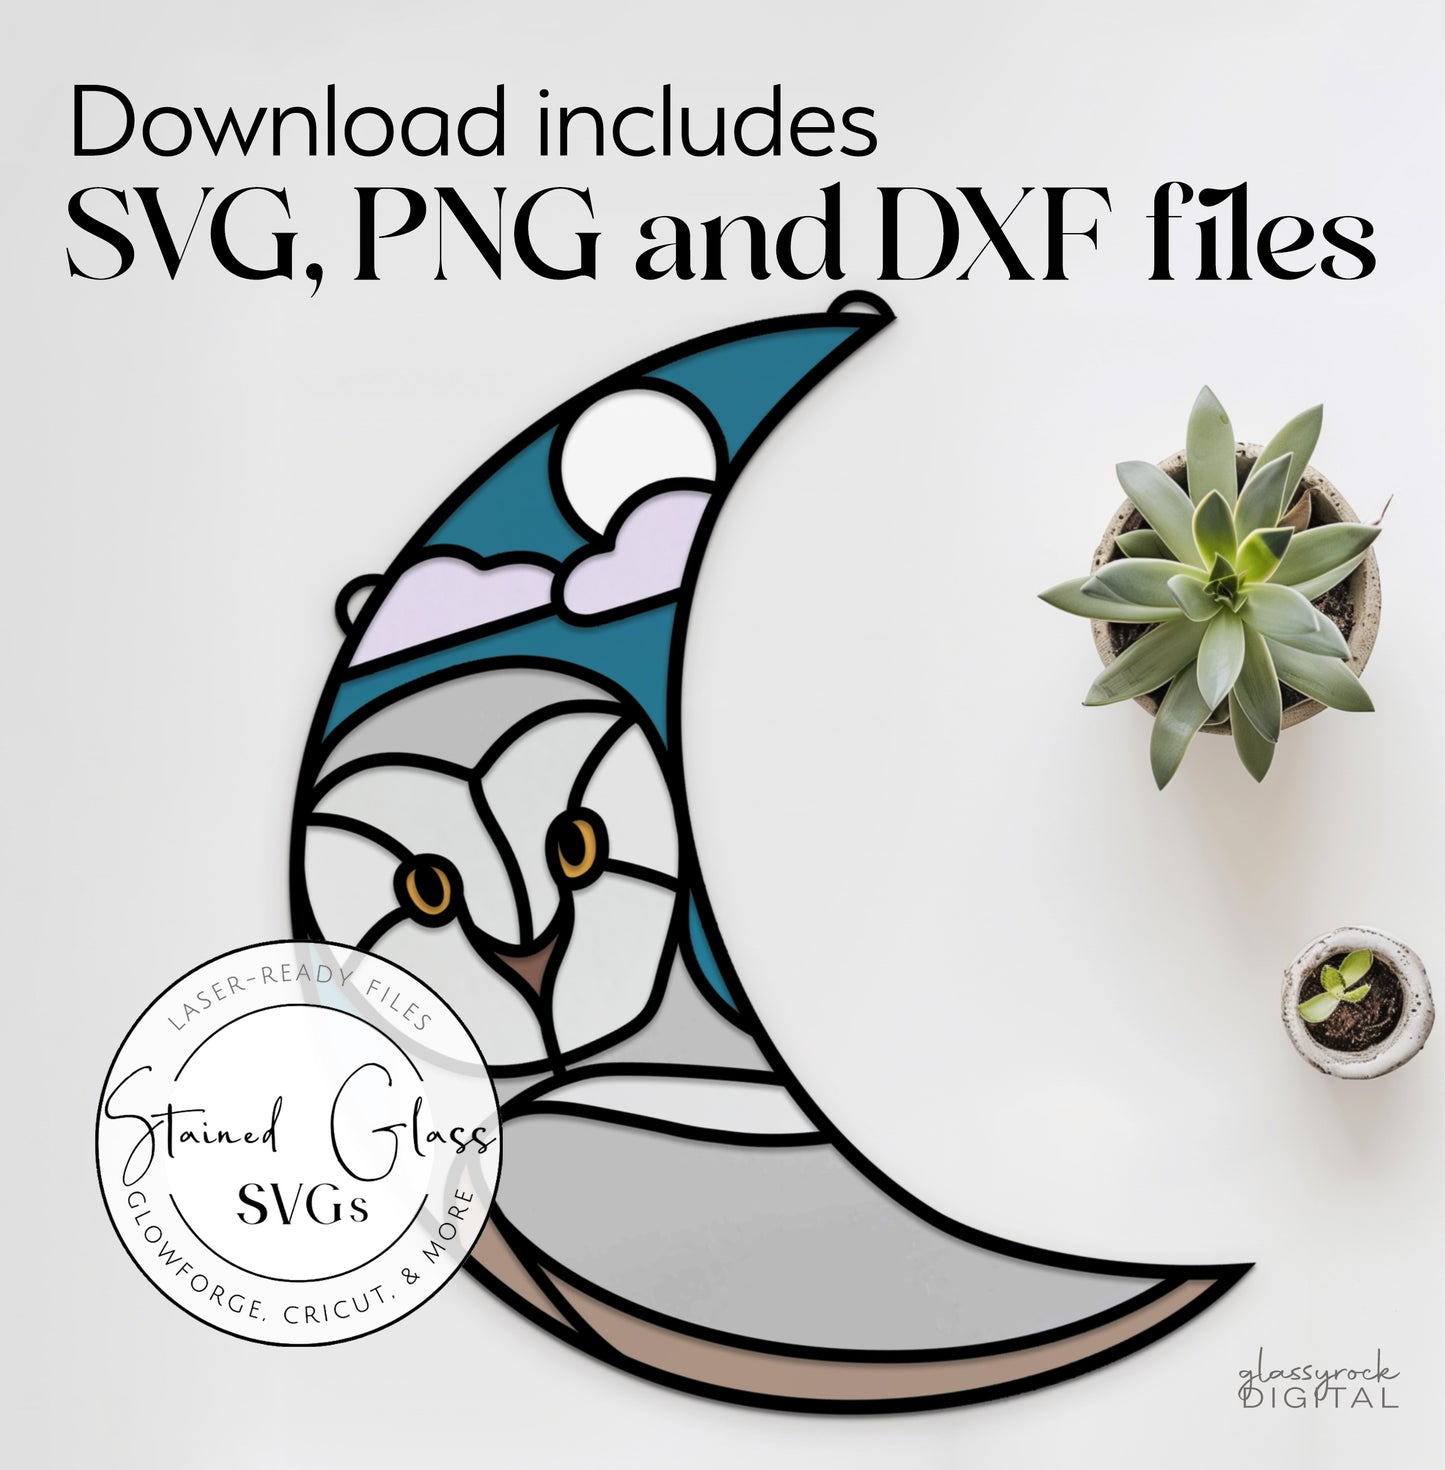 Stained Glass Snowy Owl Crescent Moon, Files for Laser Cutting - SVG, PNG, DXF